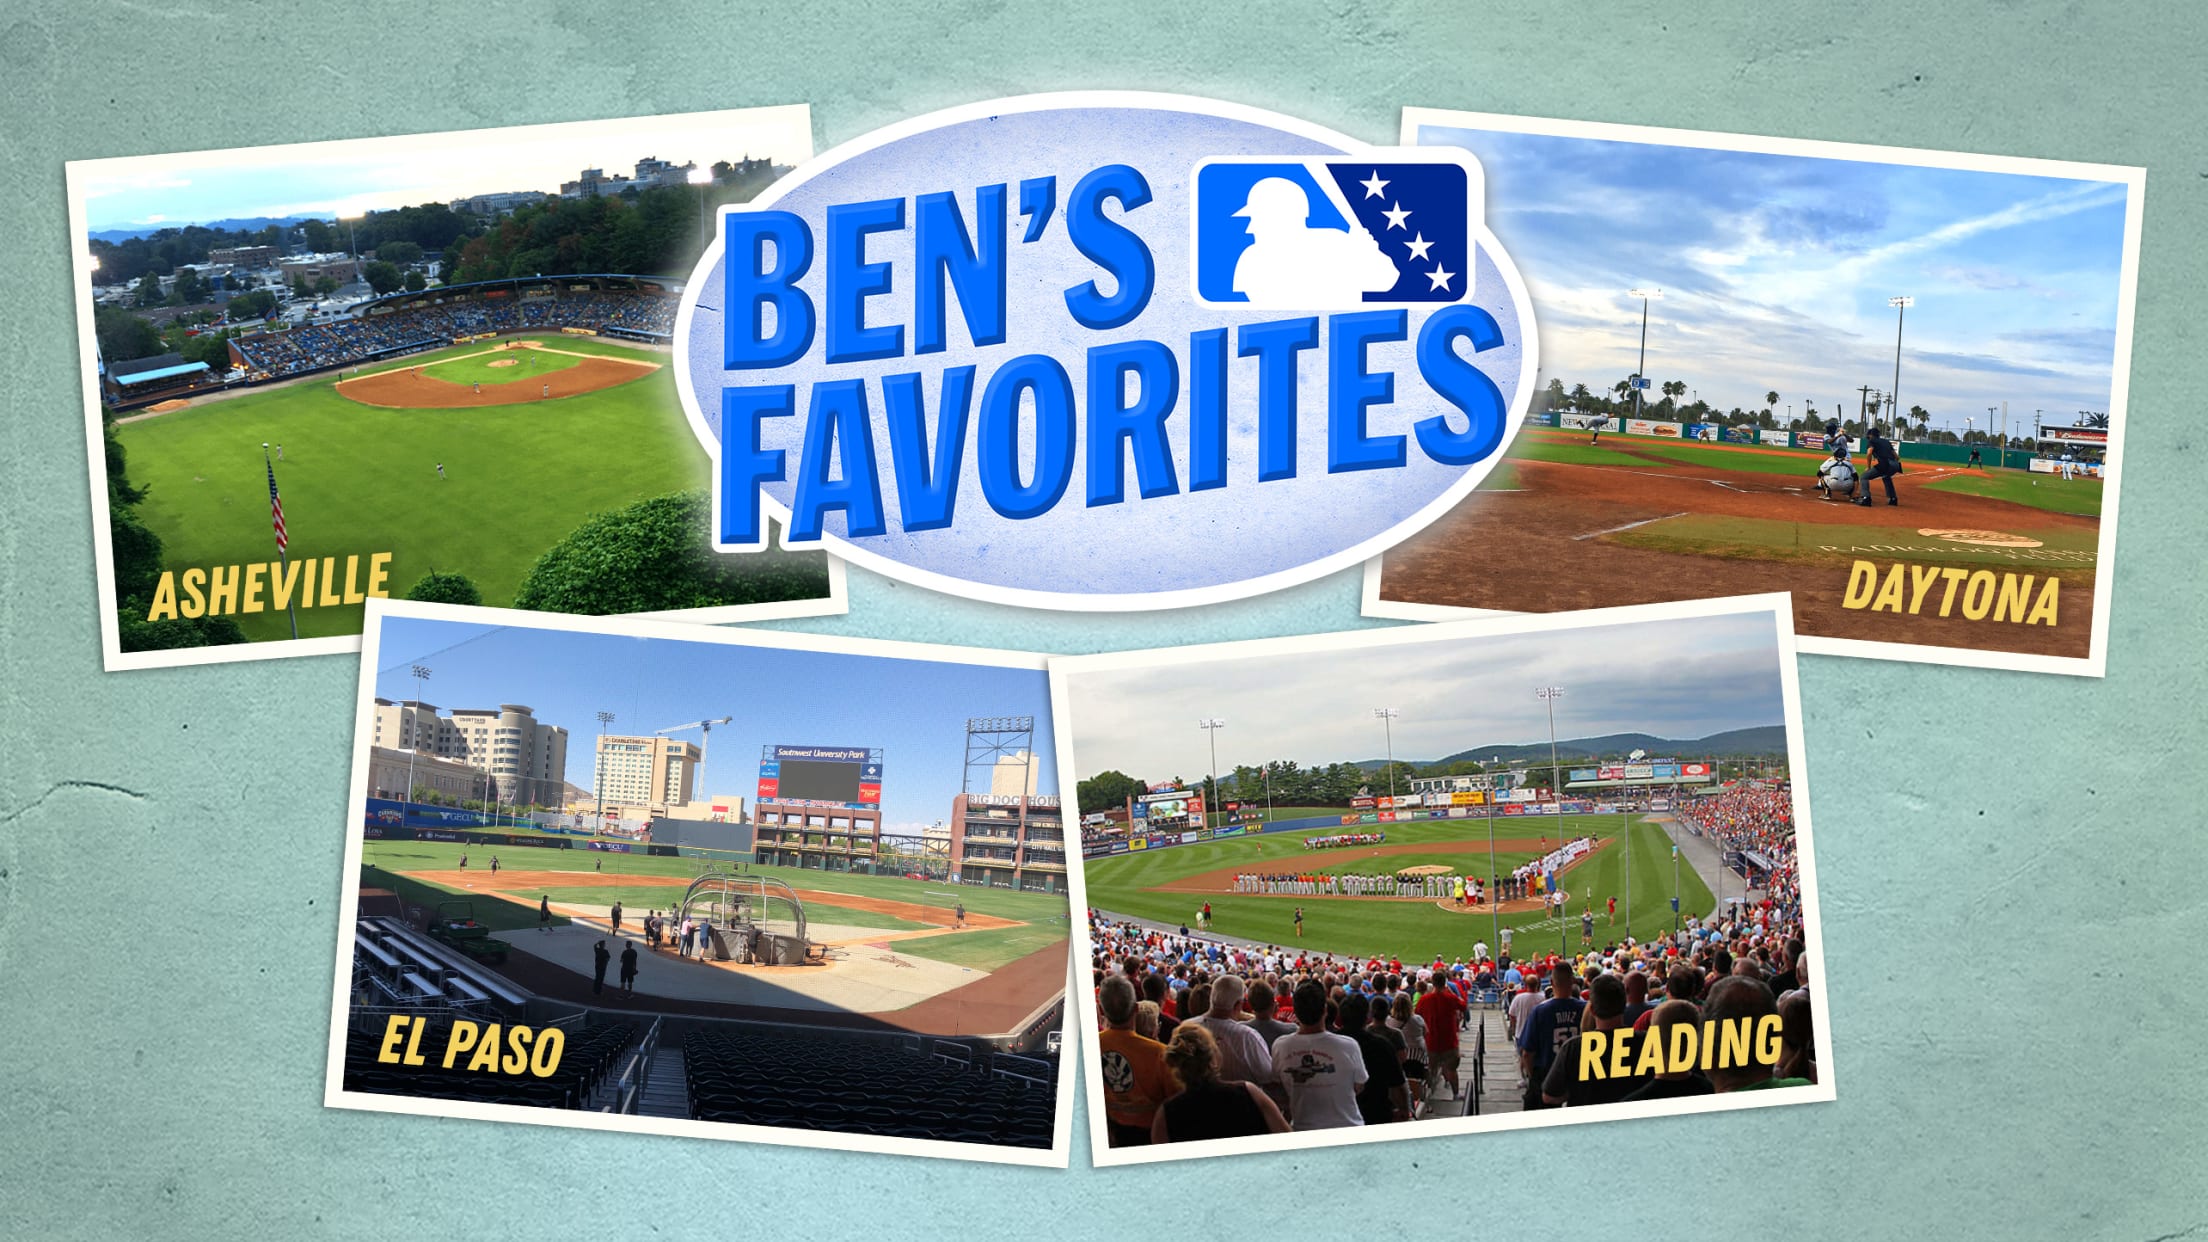 Minor League Ballparks memorable places to watch the game